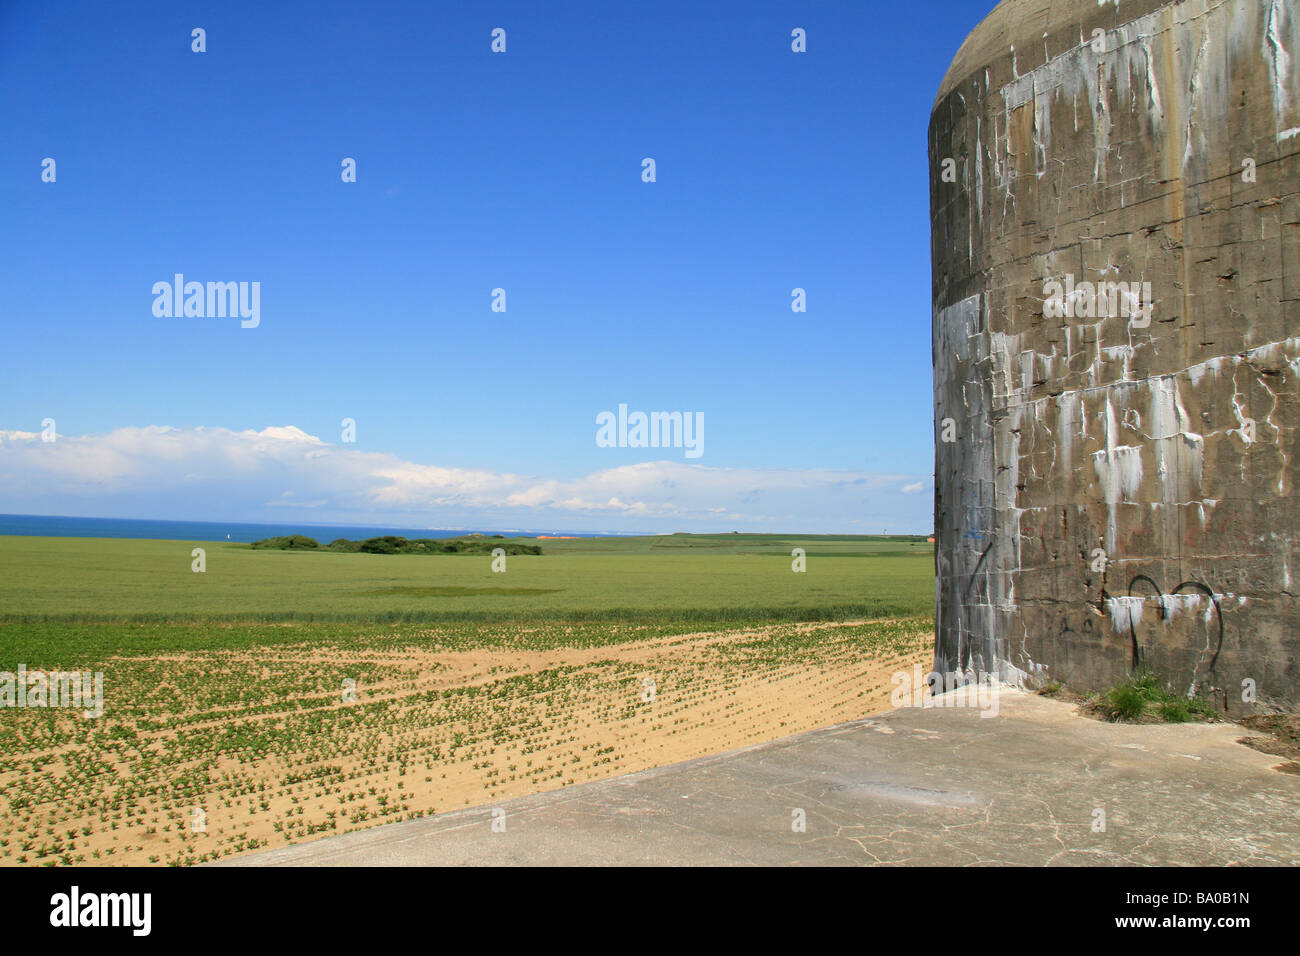 View towards the White Cliffs of Dover from a massive German WWII battery casement on the Cap Gris Nez, France. Stock Photo